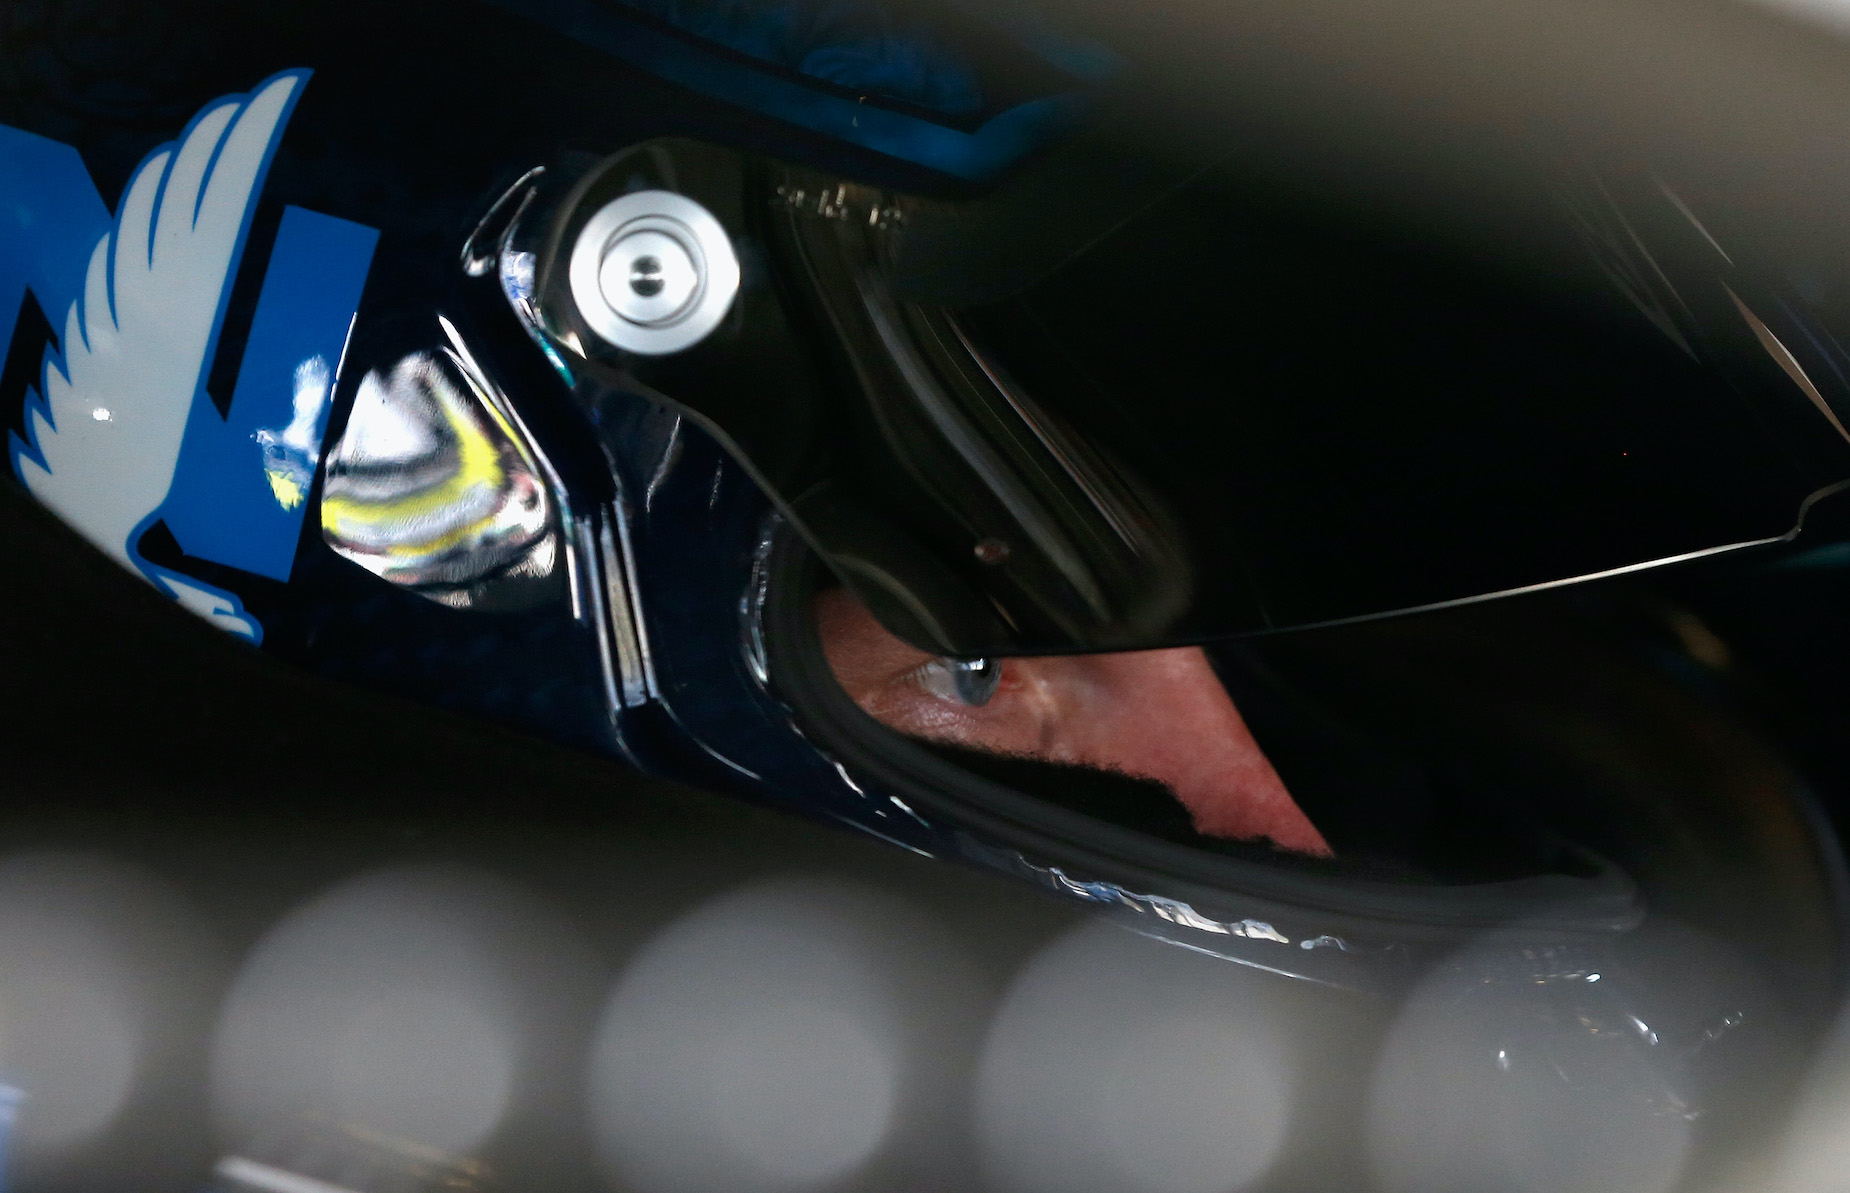 Dale Earnhardt Jr. sits in his car ahead of a 2017 NASCAR race